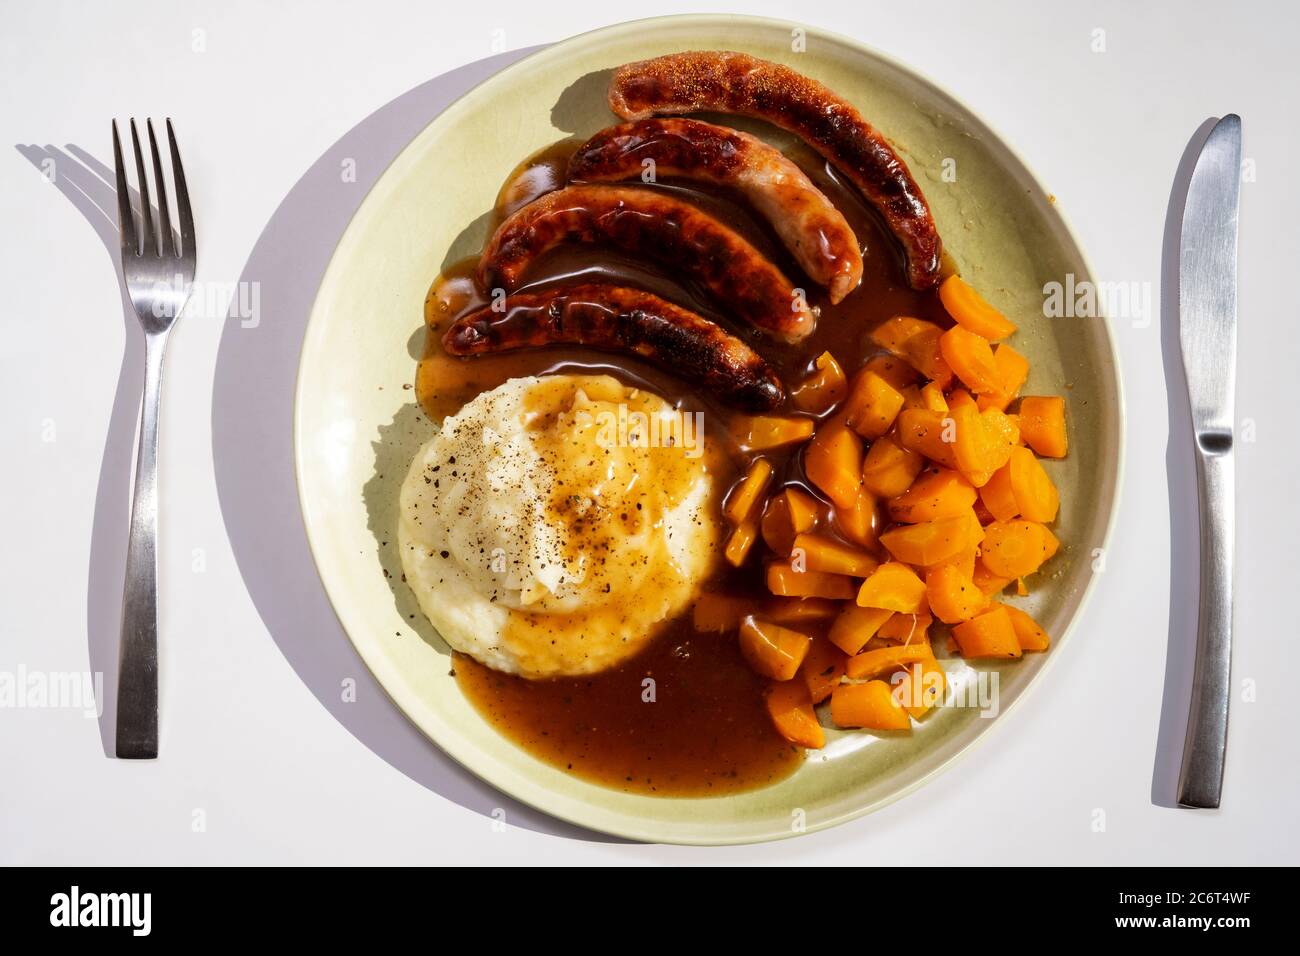 Sausage mashed potatoes and carrots Stock Photo